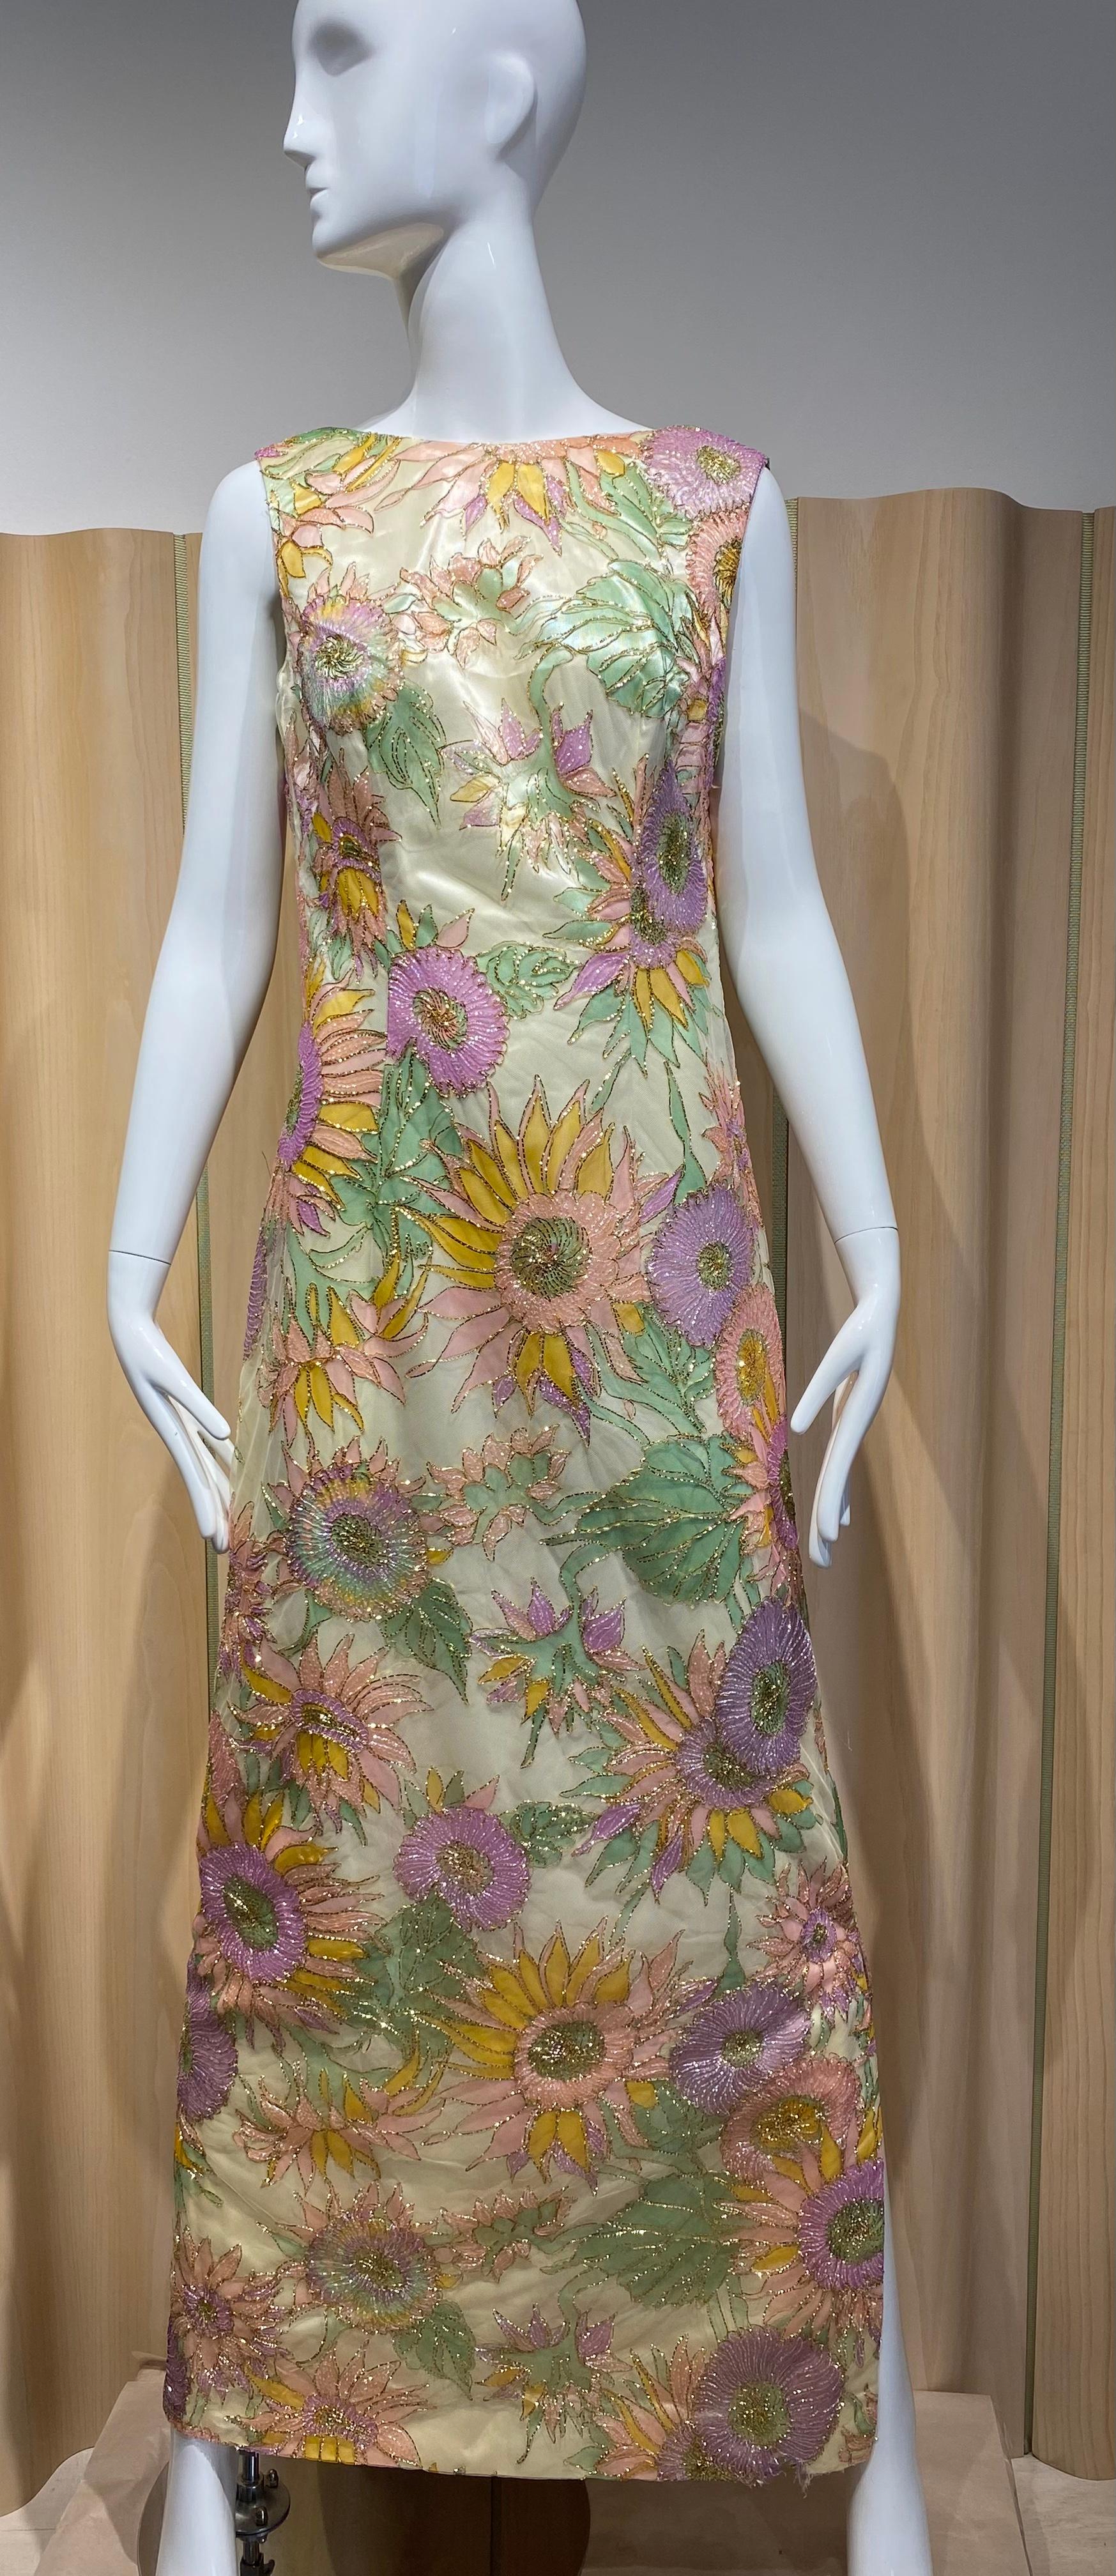 1960s custom made sleeveless shift cocktail dress in multi color sunflowers embroidered in gold metallic floral netting overlay.  Perfect for mother of the bride or wedding . 
Color : Yellow, Pink, light green and purple
Fit size Medium
Bust : 38” /